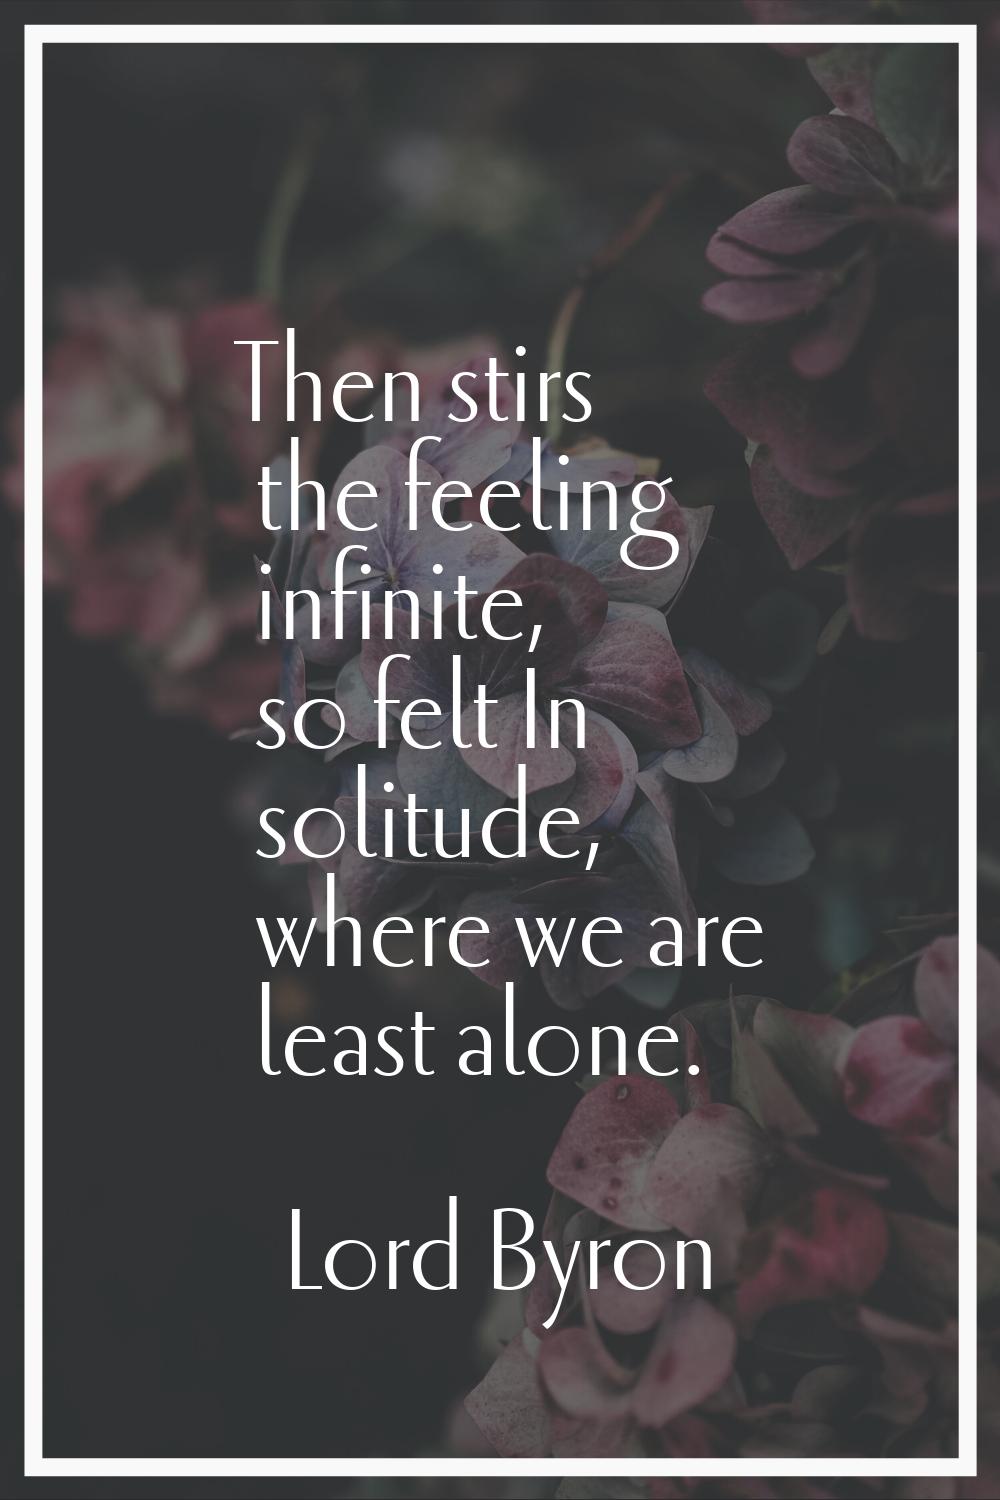 Then stirs the feeling infinite, so felt In solitude, where we are least alone.